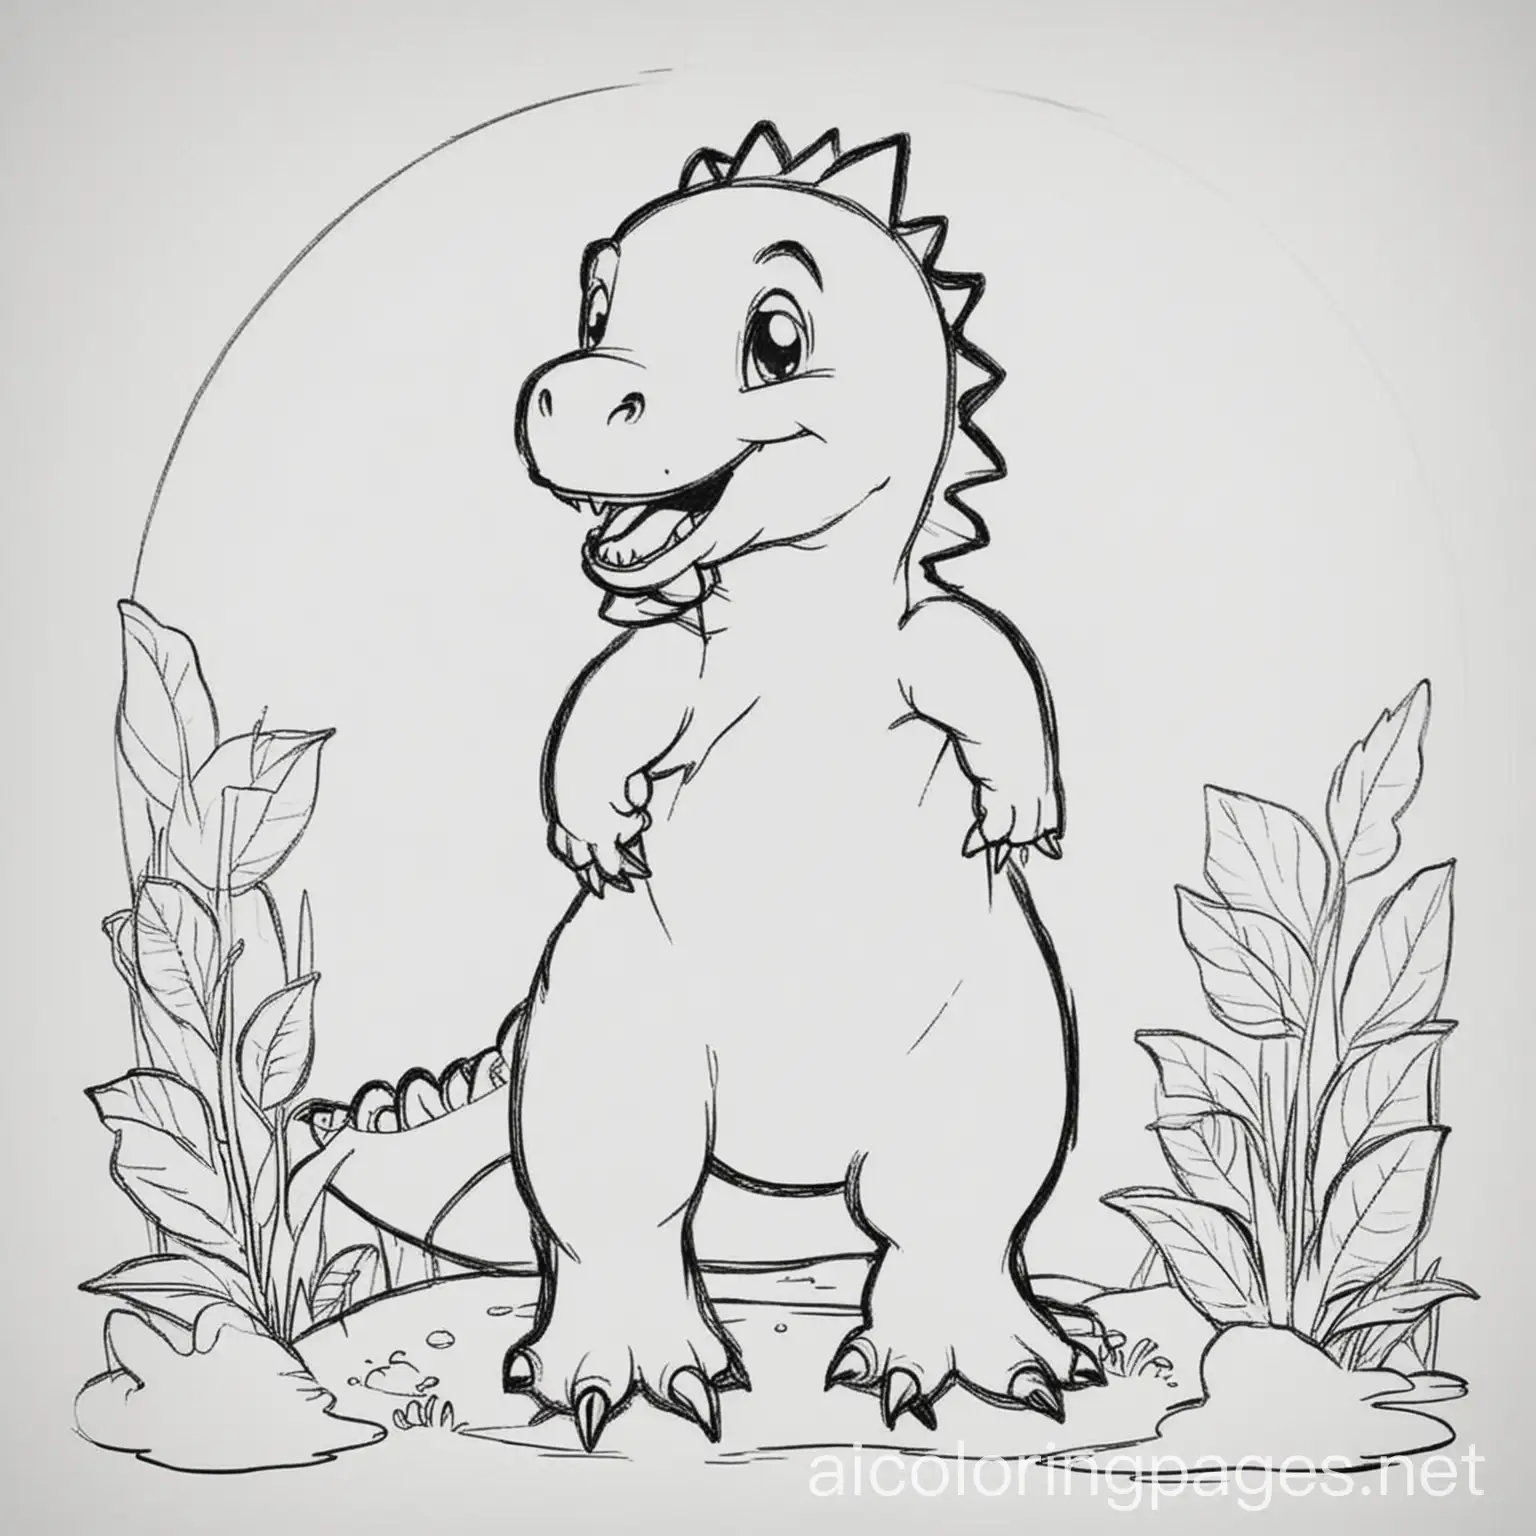 a cute dinosaur , Coloring Page, black and white, line art, white background, Simplicity, bold outline, no shading, Ample White Space. The background of the coloring page is plain white to make it easy for young children to color within the lines. The outlines of all the subjects are easy to distinguish, making it simple for kids to color without too much difficulty, Coloring Page, black and white, line art, white background, Simplicity, Ample White Space. The background of the coloring page is plain white to make it easy for young children to color within the lines. The outlines of all the subjects are easy to distinguish, making it simple for kids to color without too much difficulty, Coloring Page, black and white, line art, white background, Simplicity, Ample White Space. The background of the coloring page is plain white to make it easy for young children to color within the lines. The outlines of all the subjects are easy to distinguish, making it simple for kids to color without too much difficulty